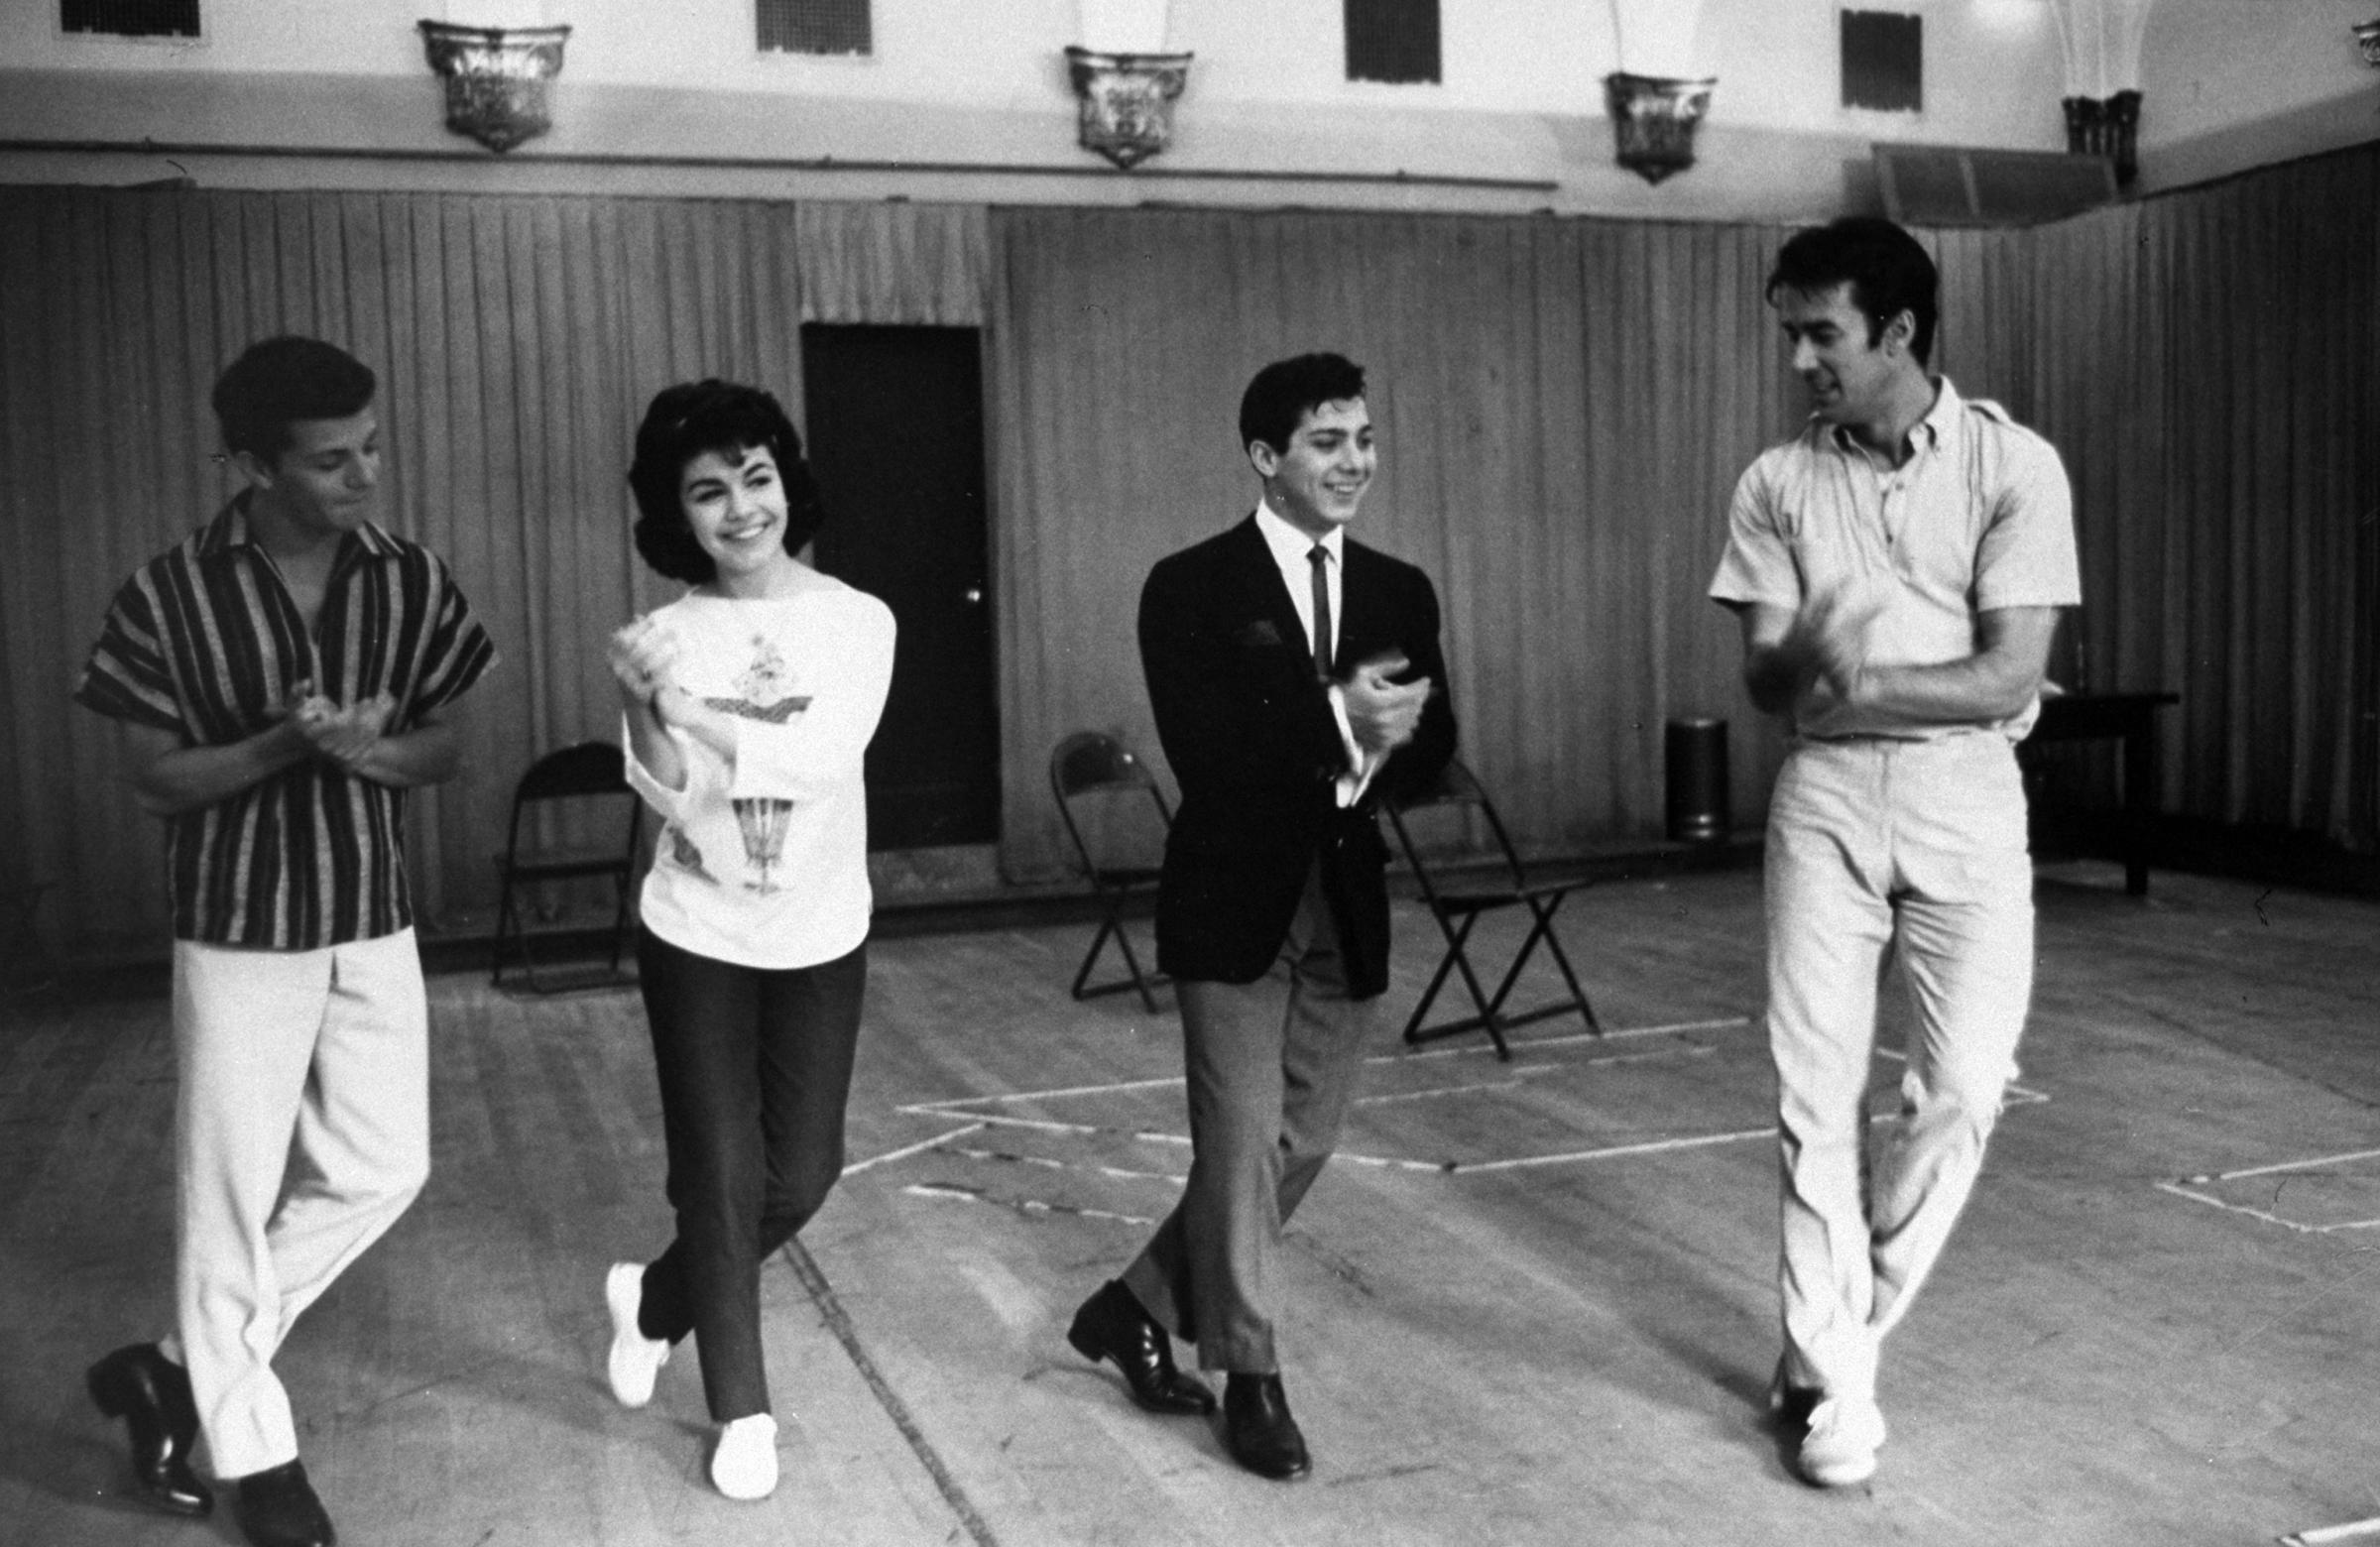 Frankie Avalon, Annette Funicello and Paul Anka rehearsing with a dance instructor, 1960.